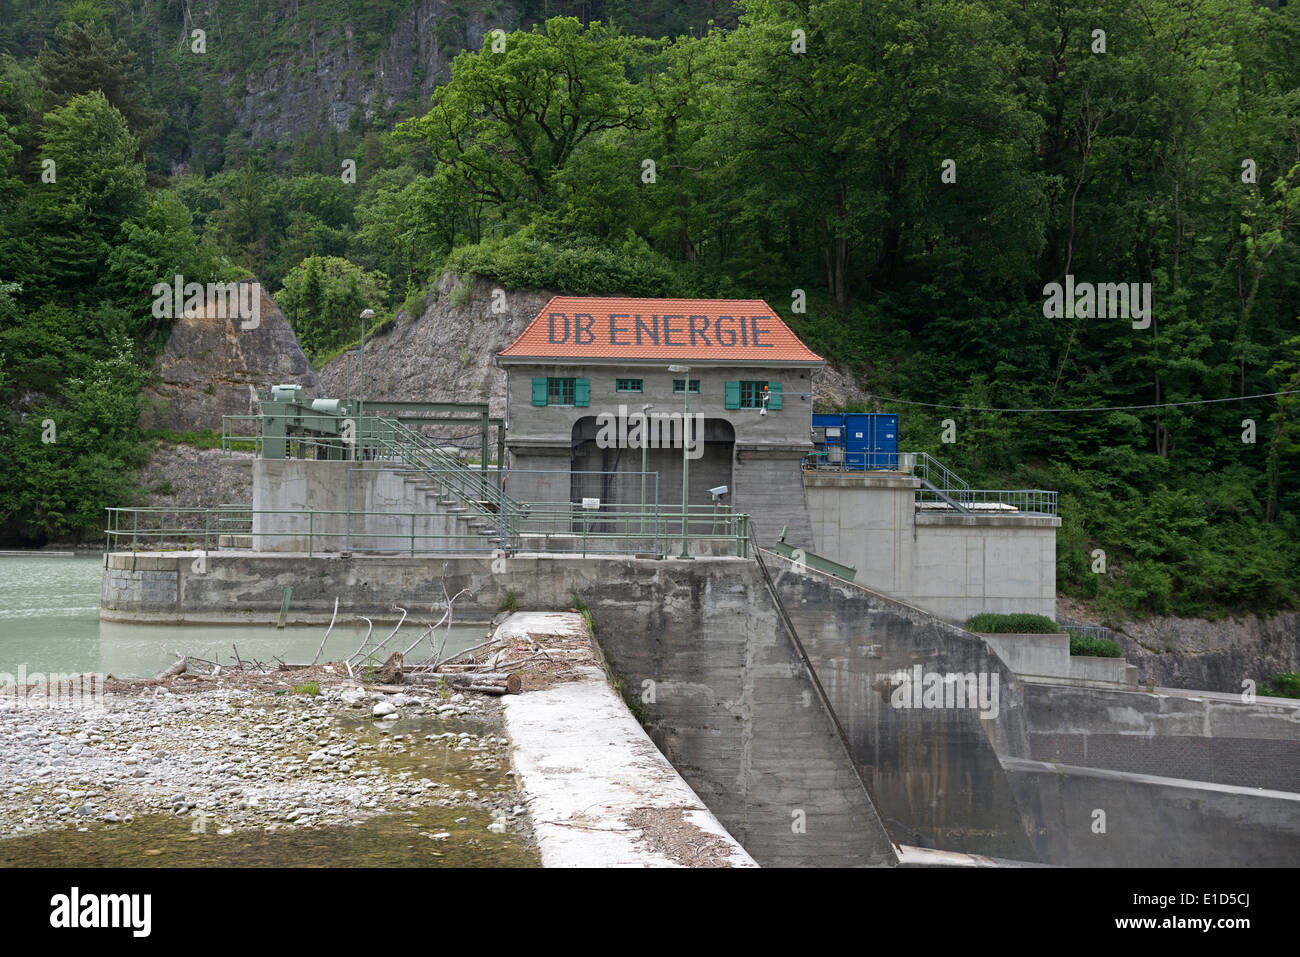 Hydroelectric power station owned by DB Energie part of German Railways ...